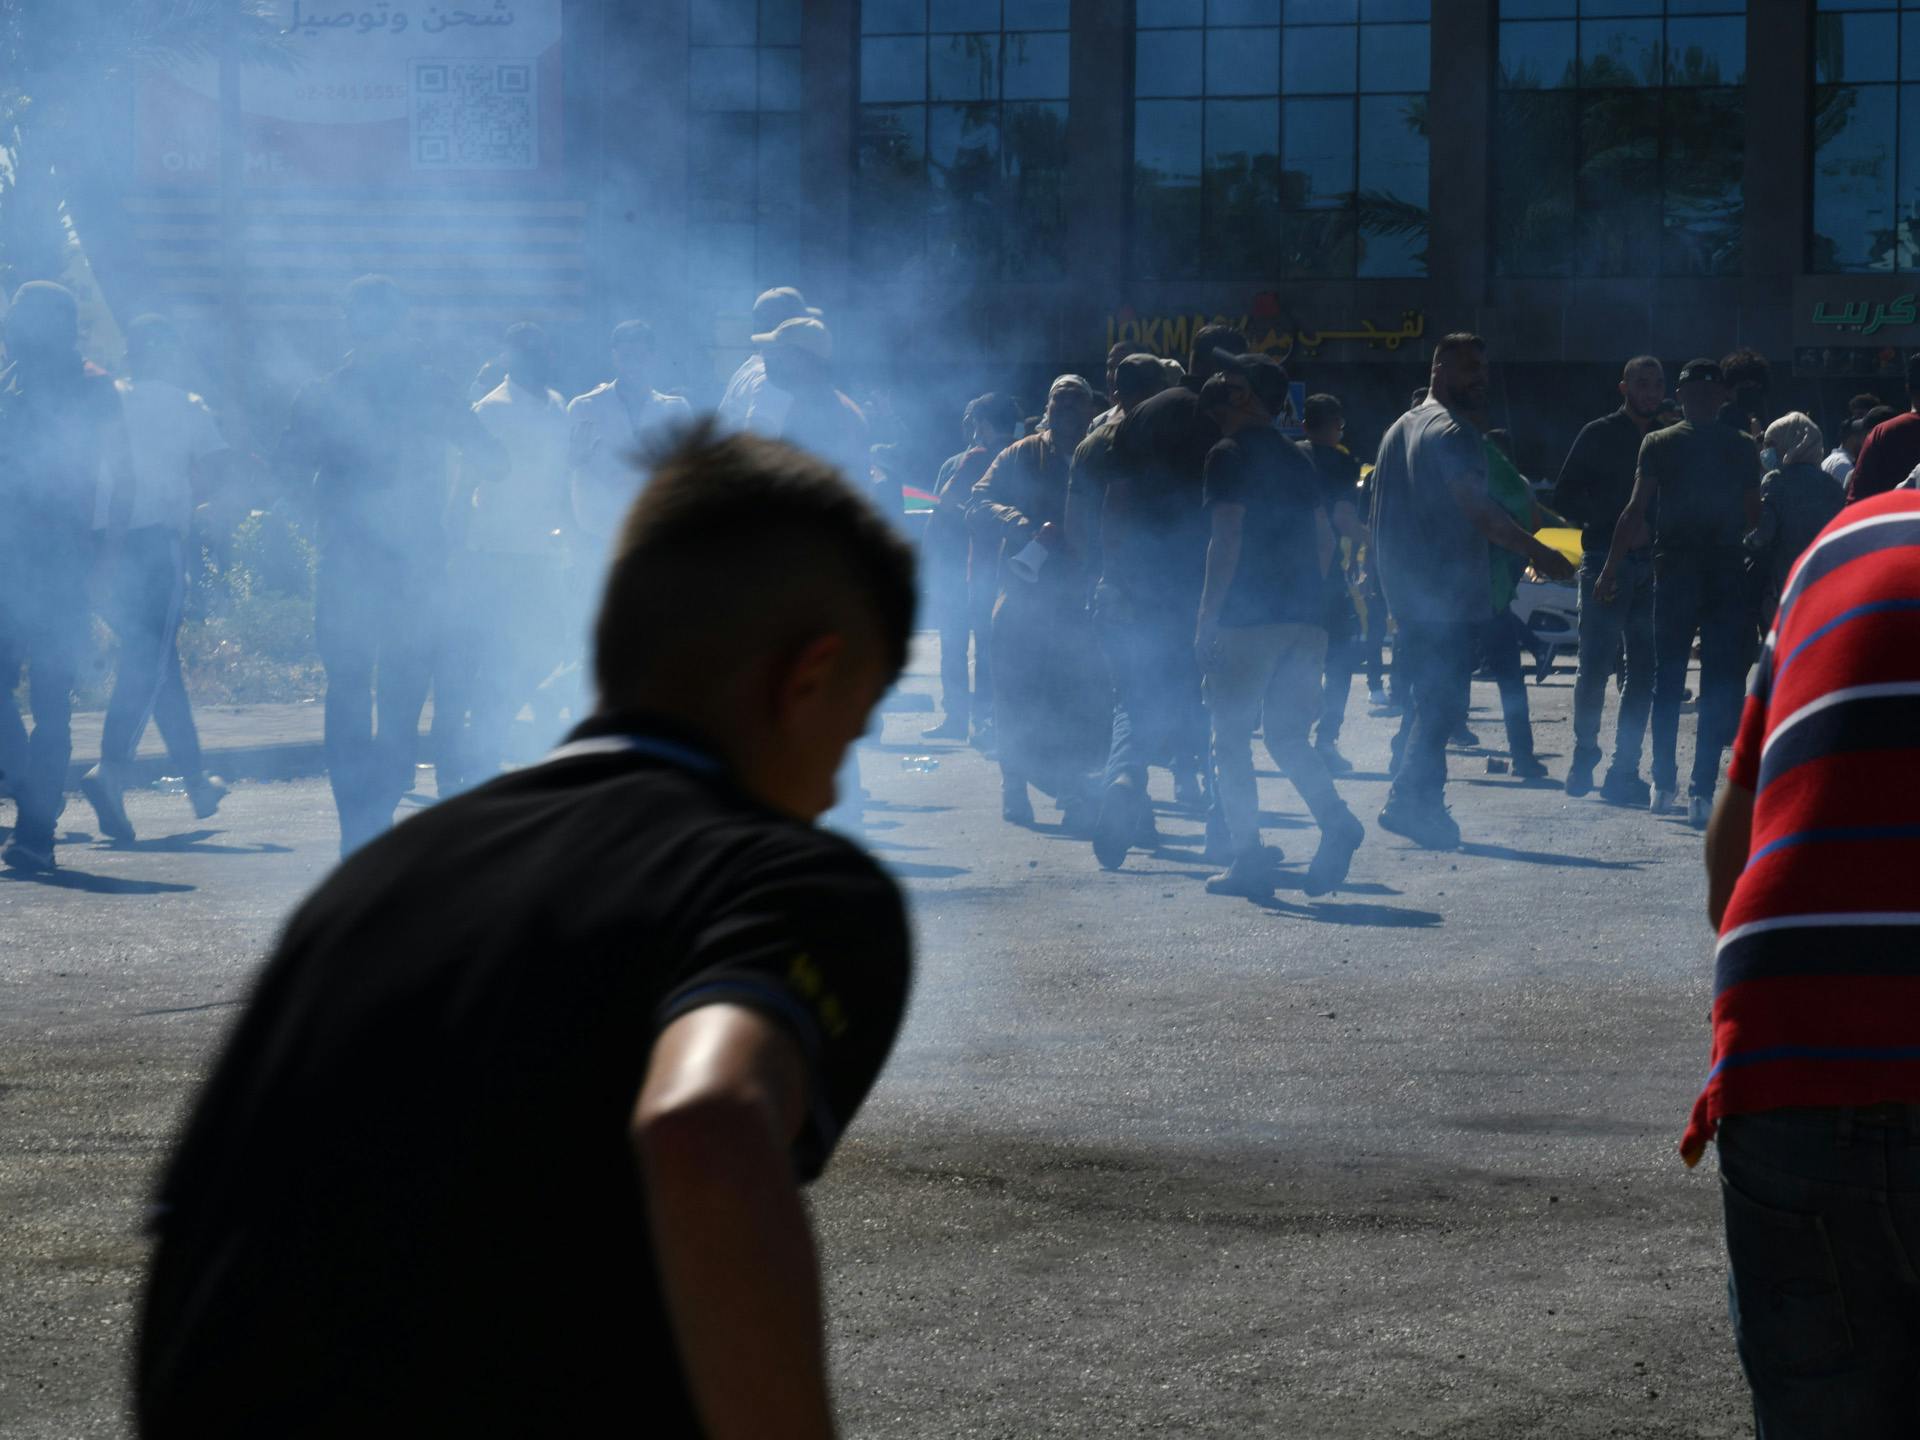 The silhouette of a group of demonstrators in the smoke.